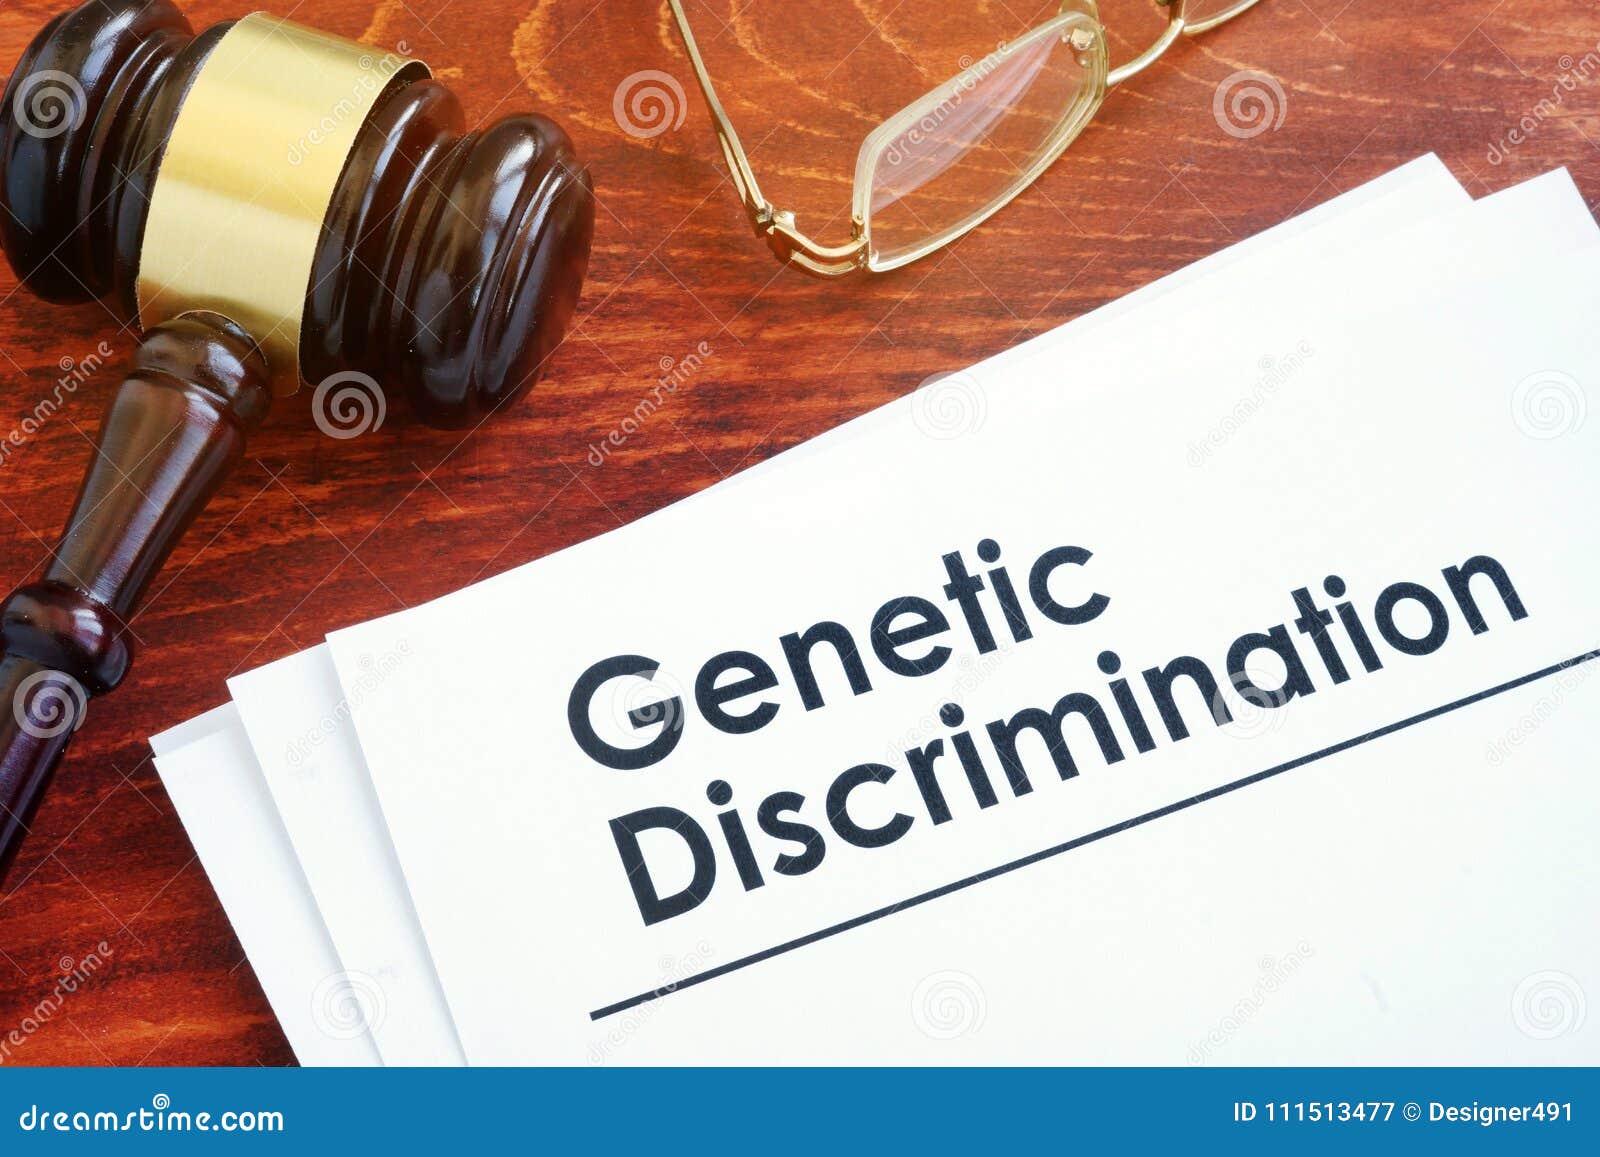 papers about genetic discrimination.